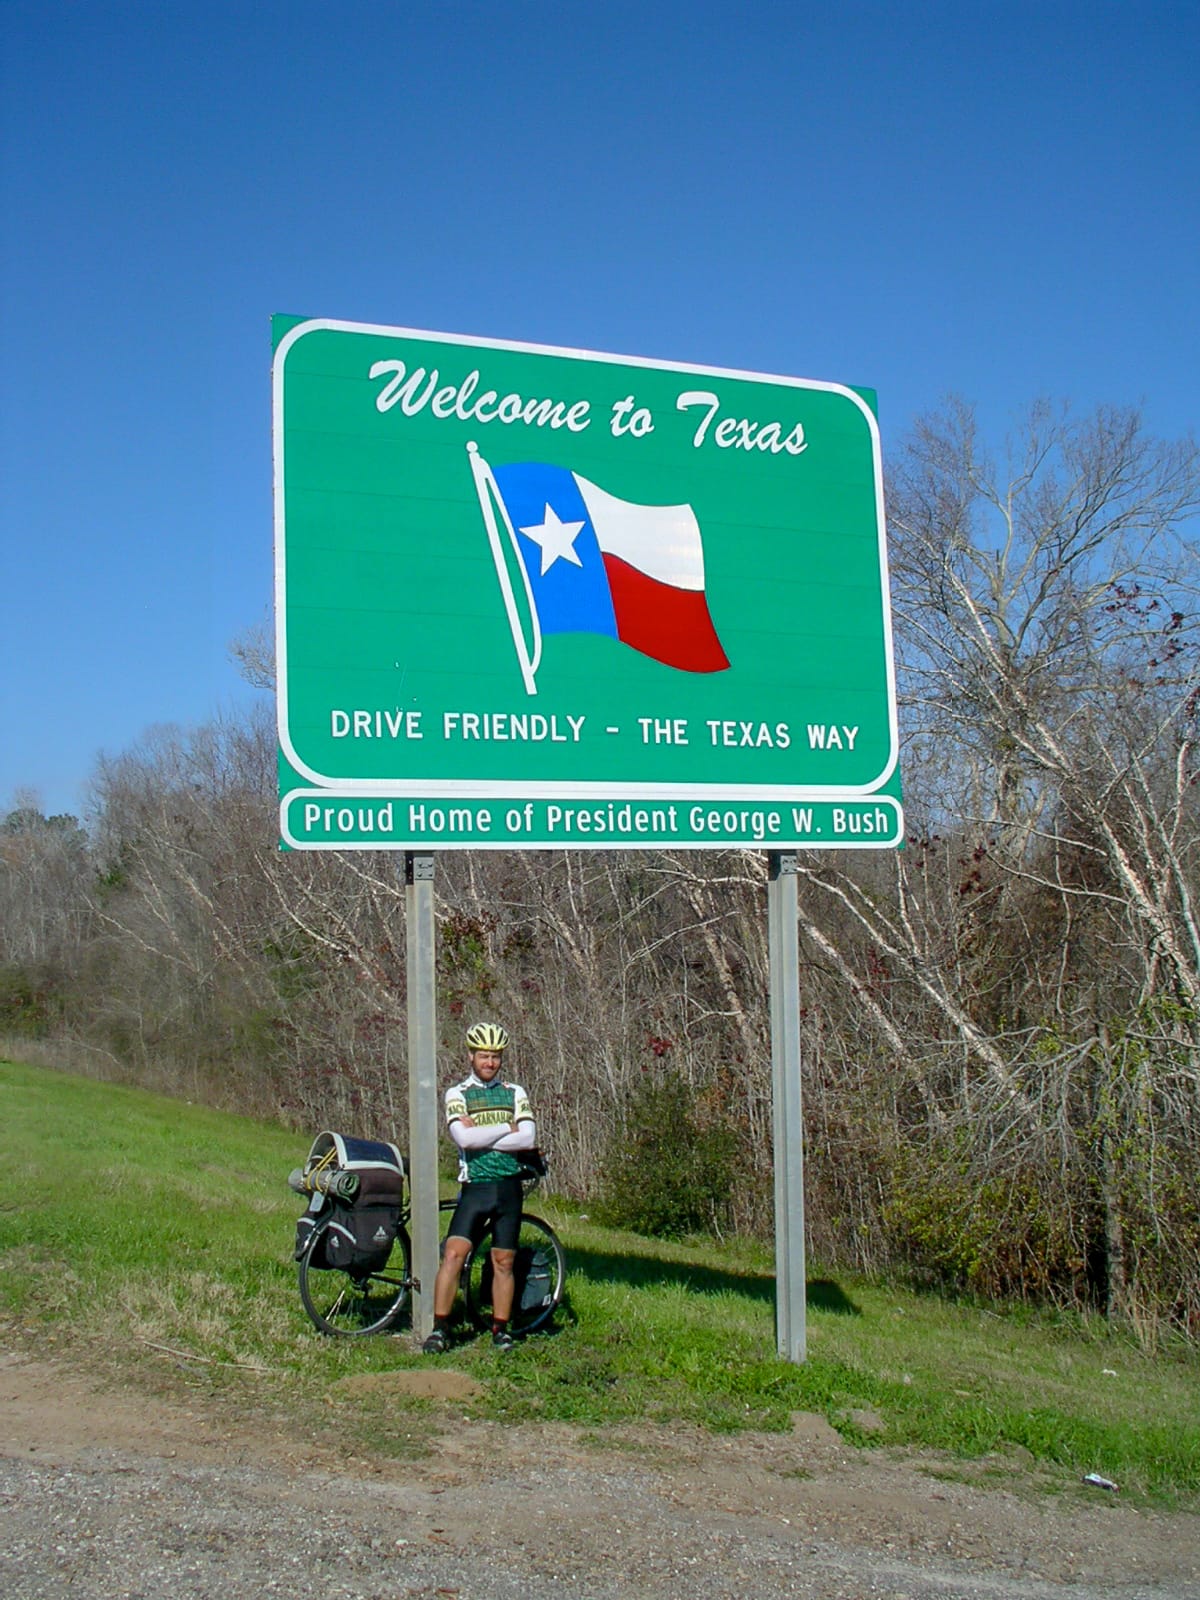 It’s Texas for the next 800 miles